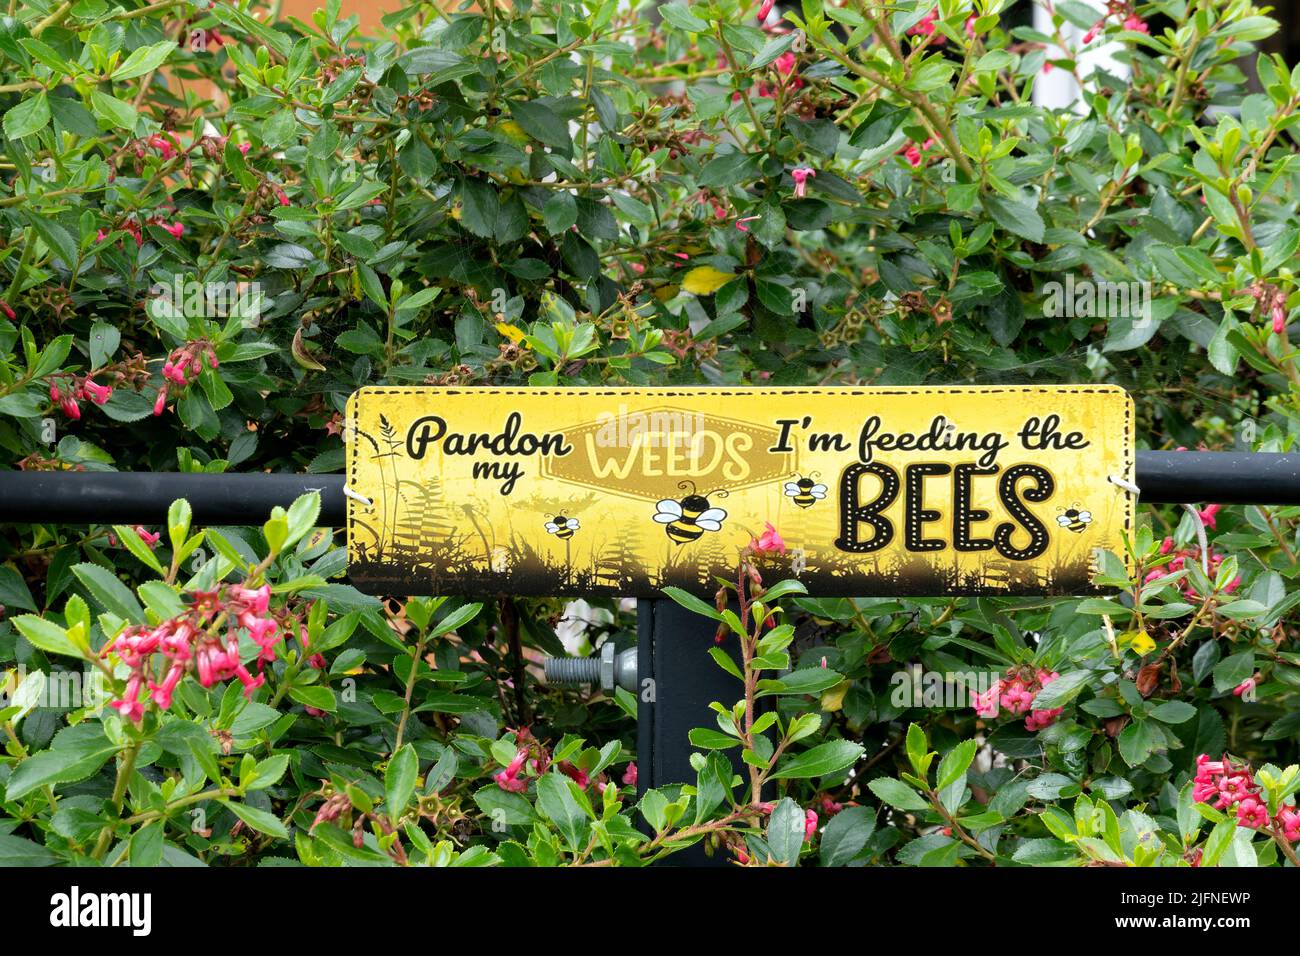 A comical, metal domestic garden sign, placed by the owners bush to advise they are growing weeds for the benefit of bees. Stock Photo